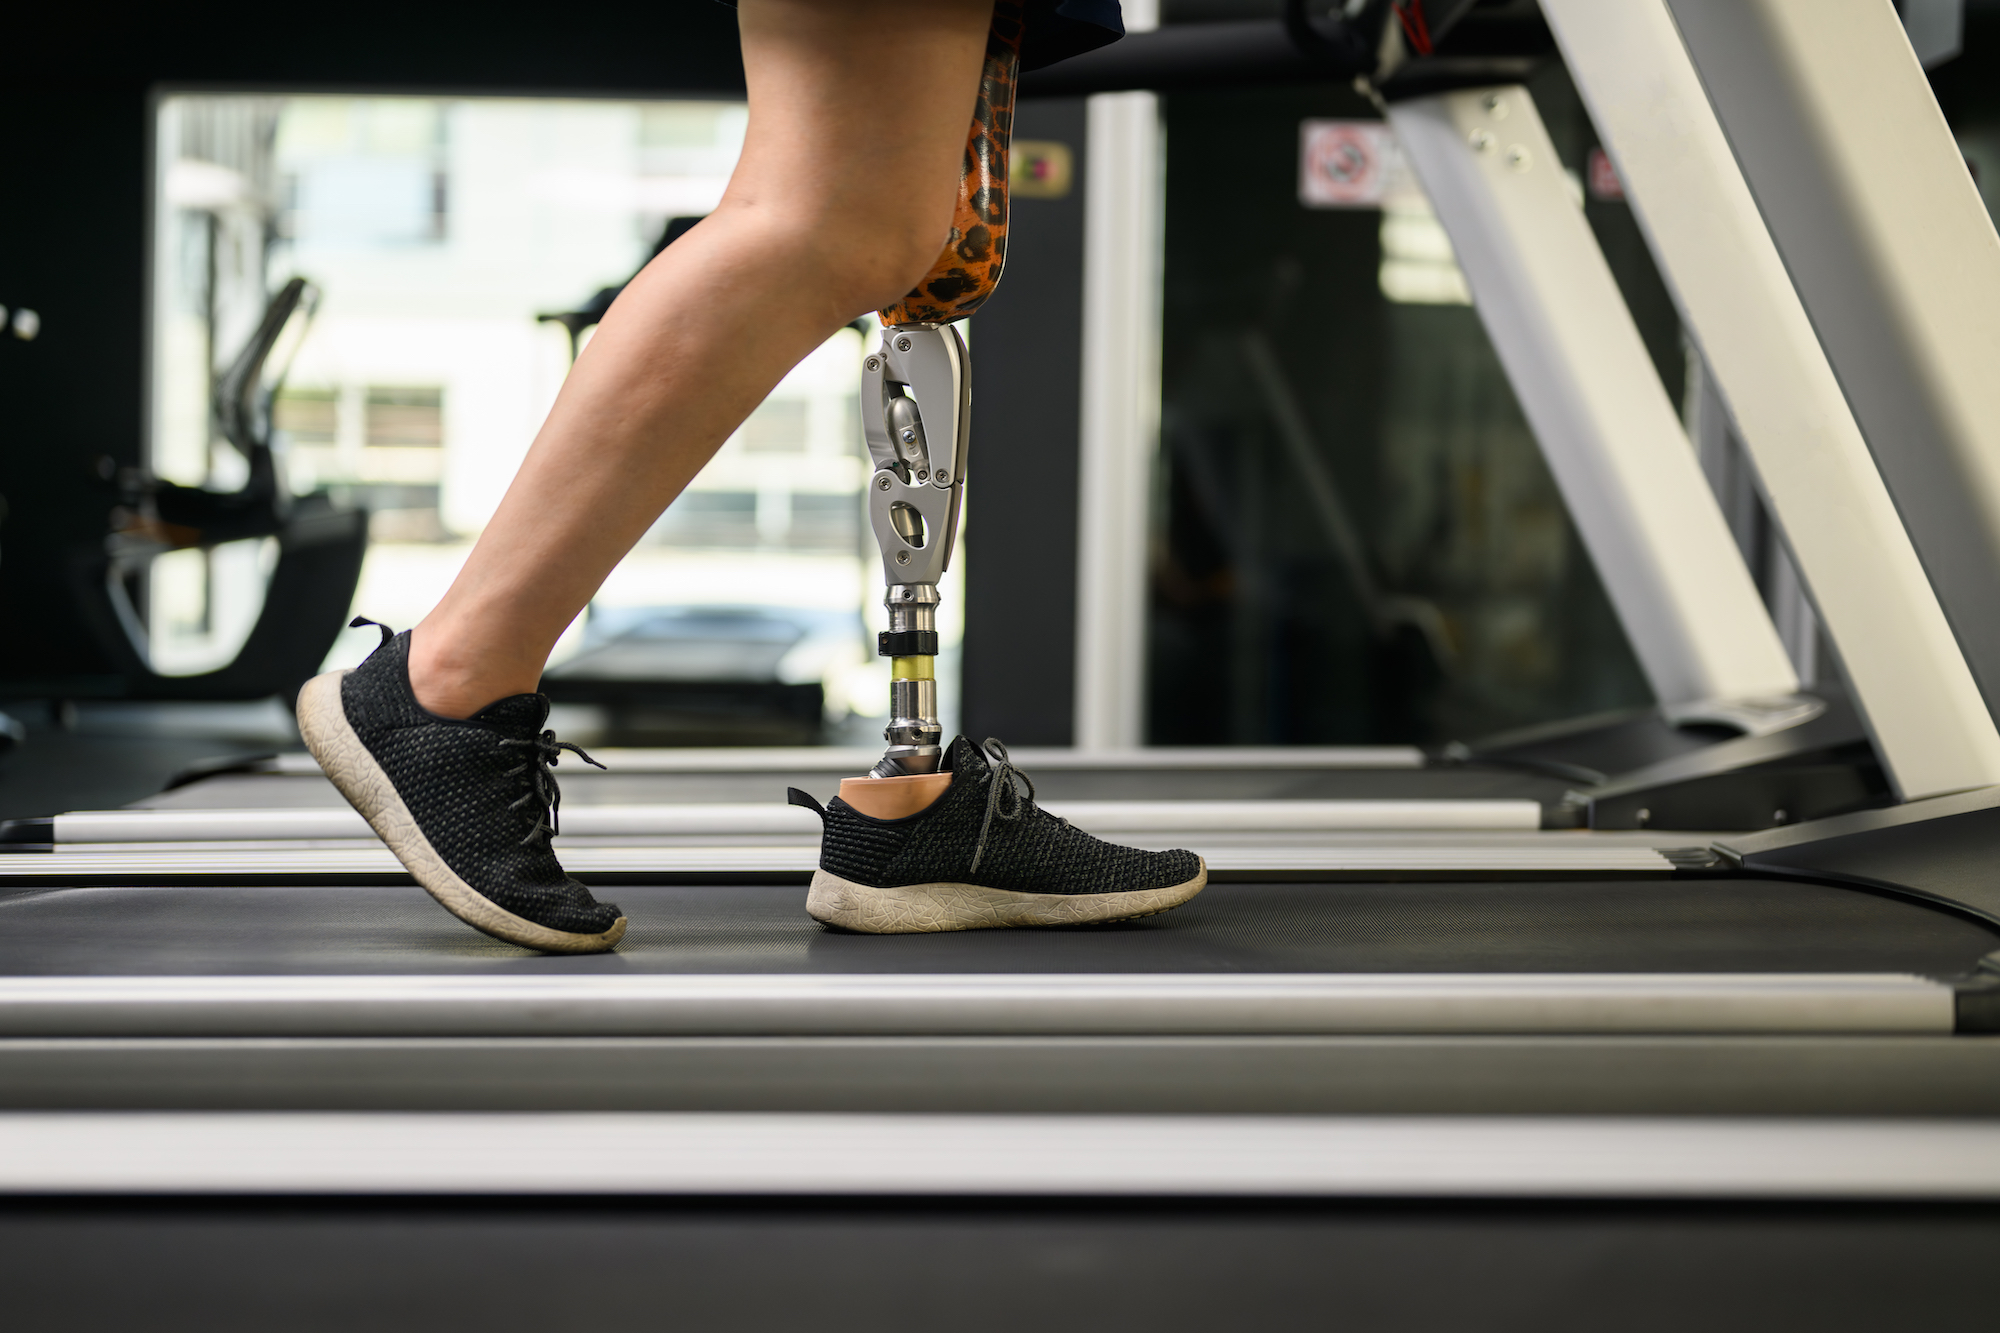 athlete on treadmill with prosthetic leg at gym.